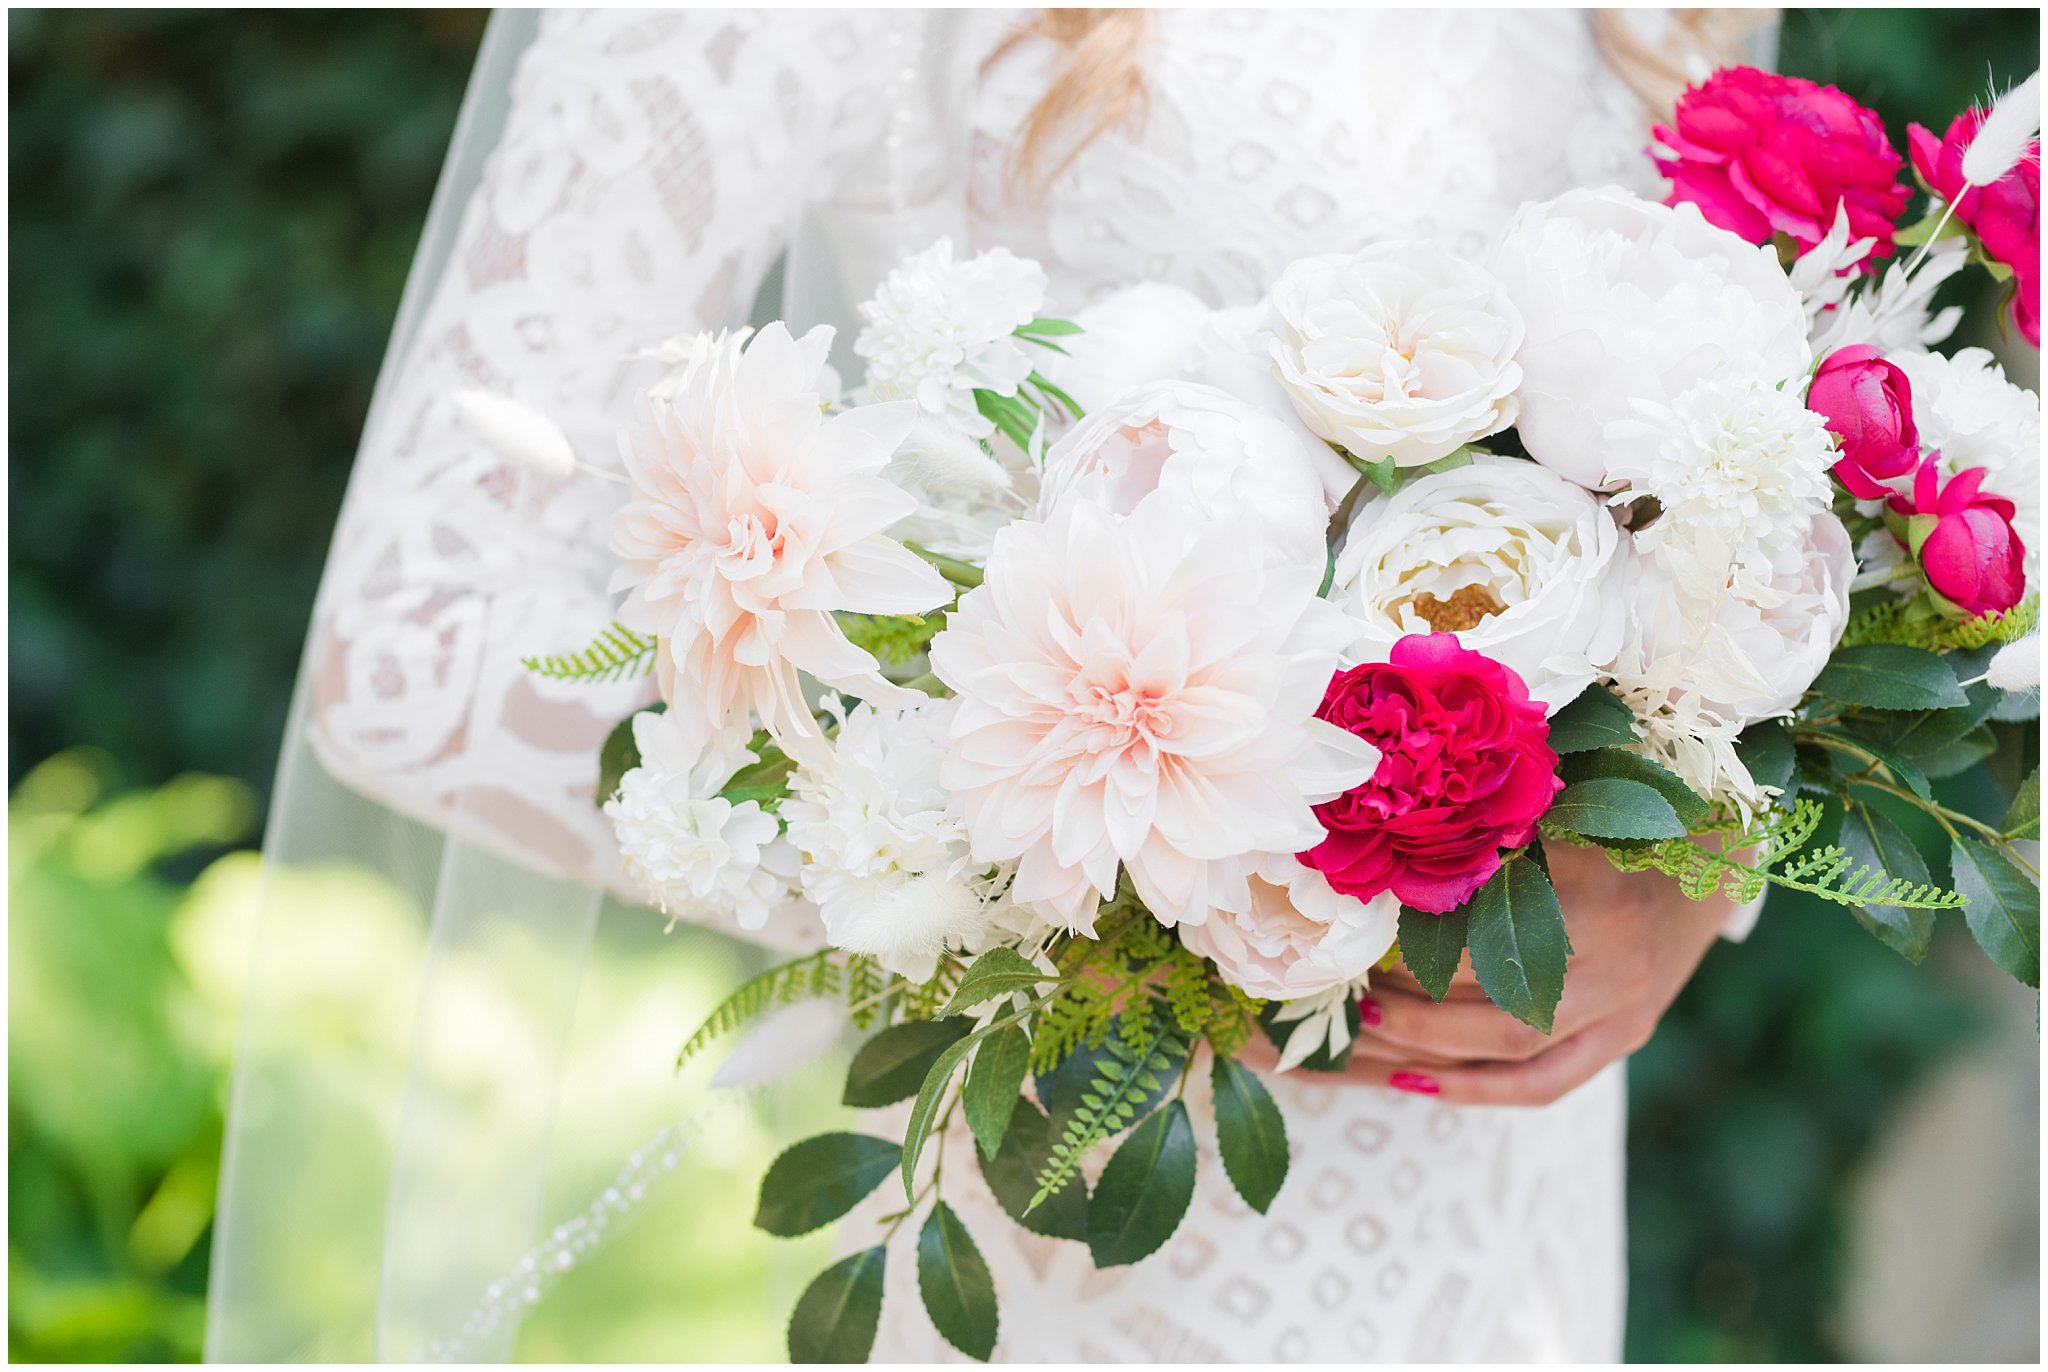 Bride in lace dress holding bouquet of white and deep pink florals | Wadley Farms Summer Wedding | Jessie and Dallin Photography